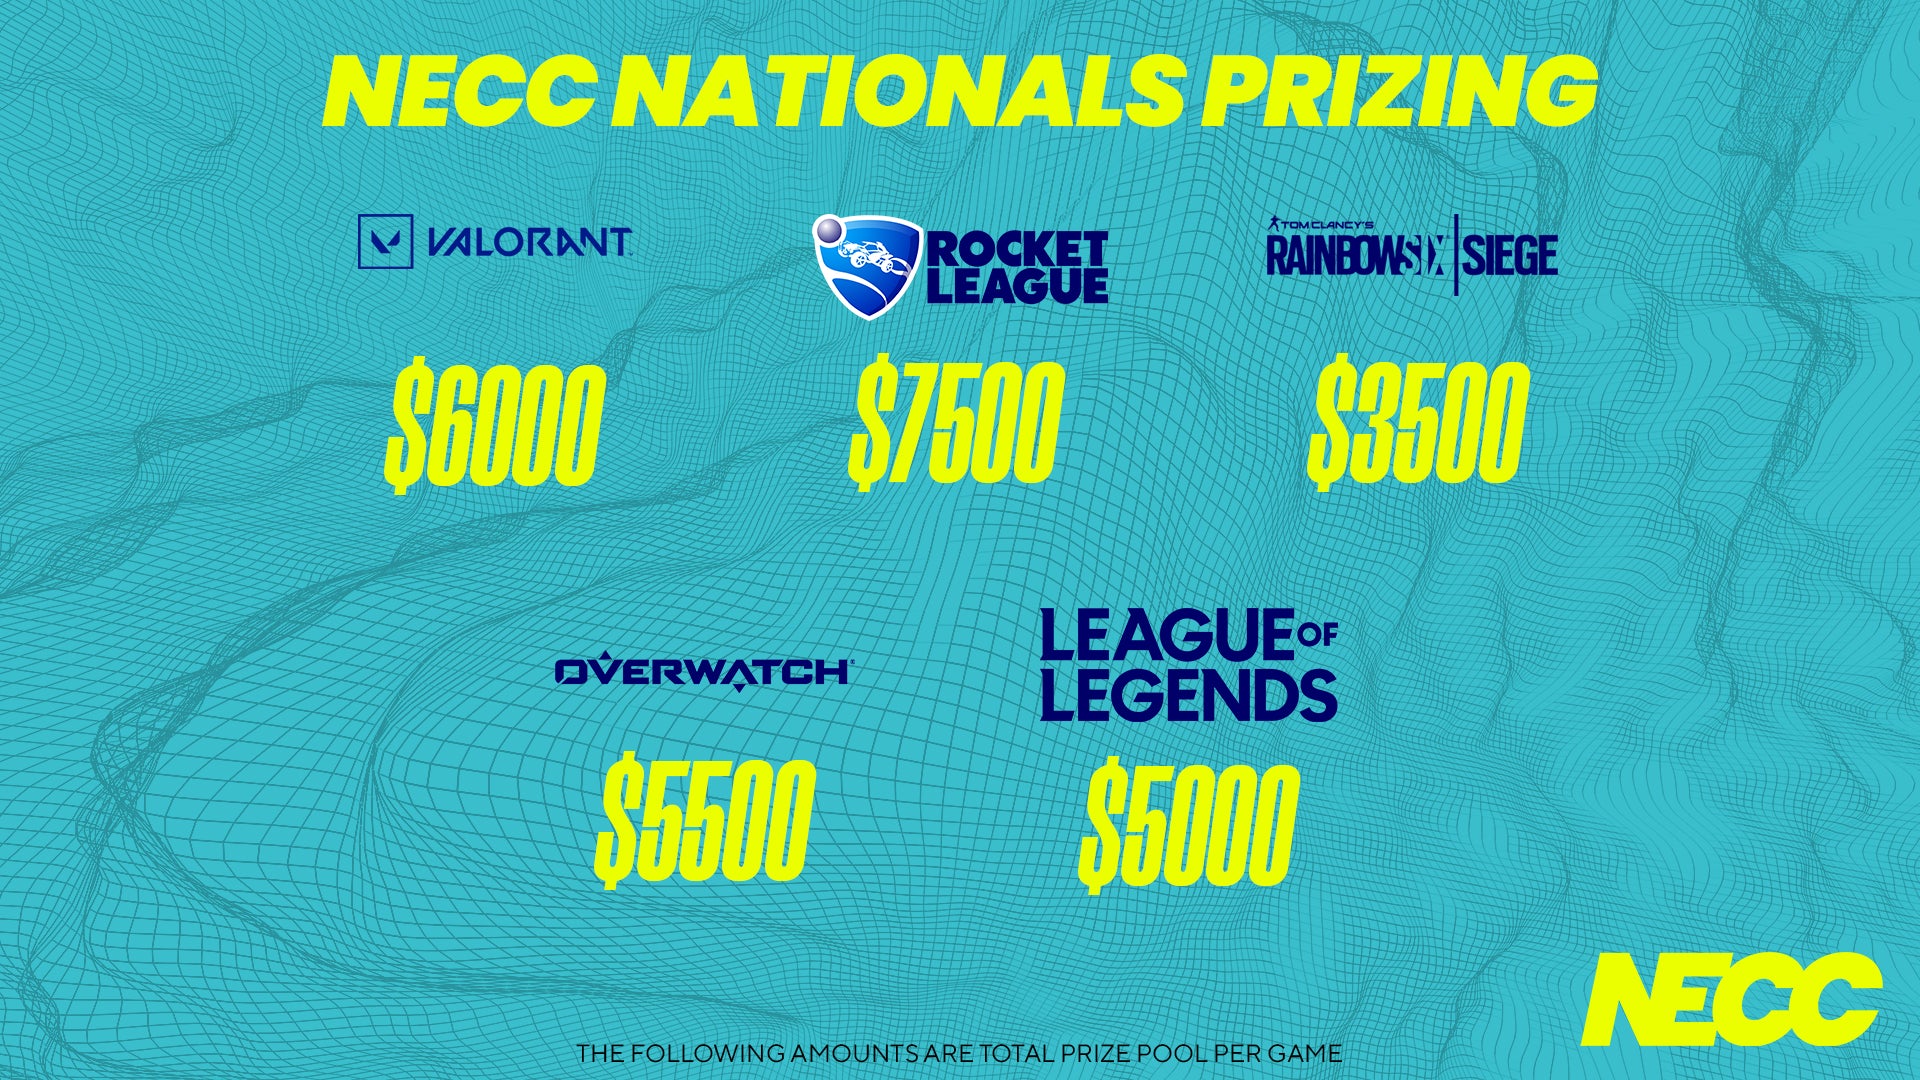 NECC Announces Final Prizing Totals for Upcoming National Championships